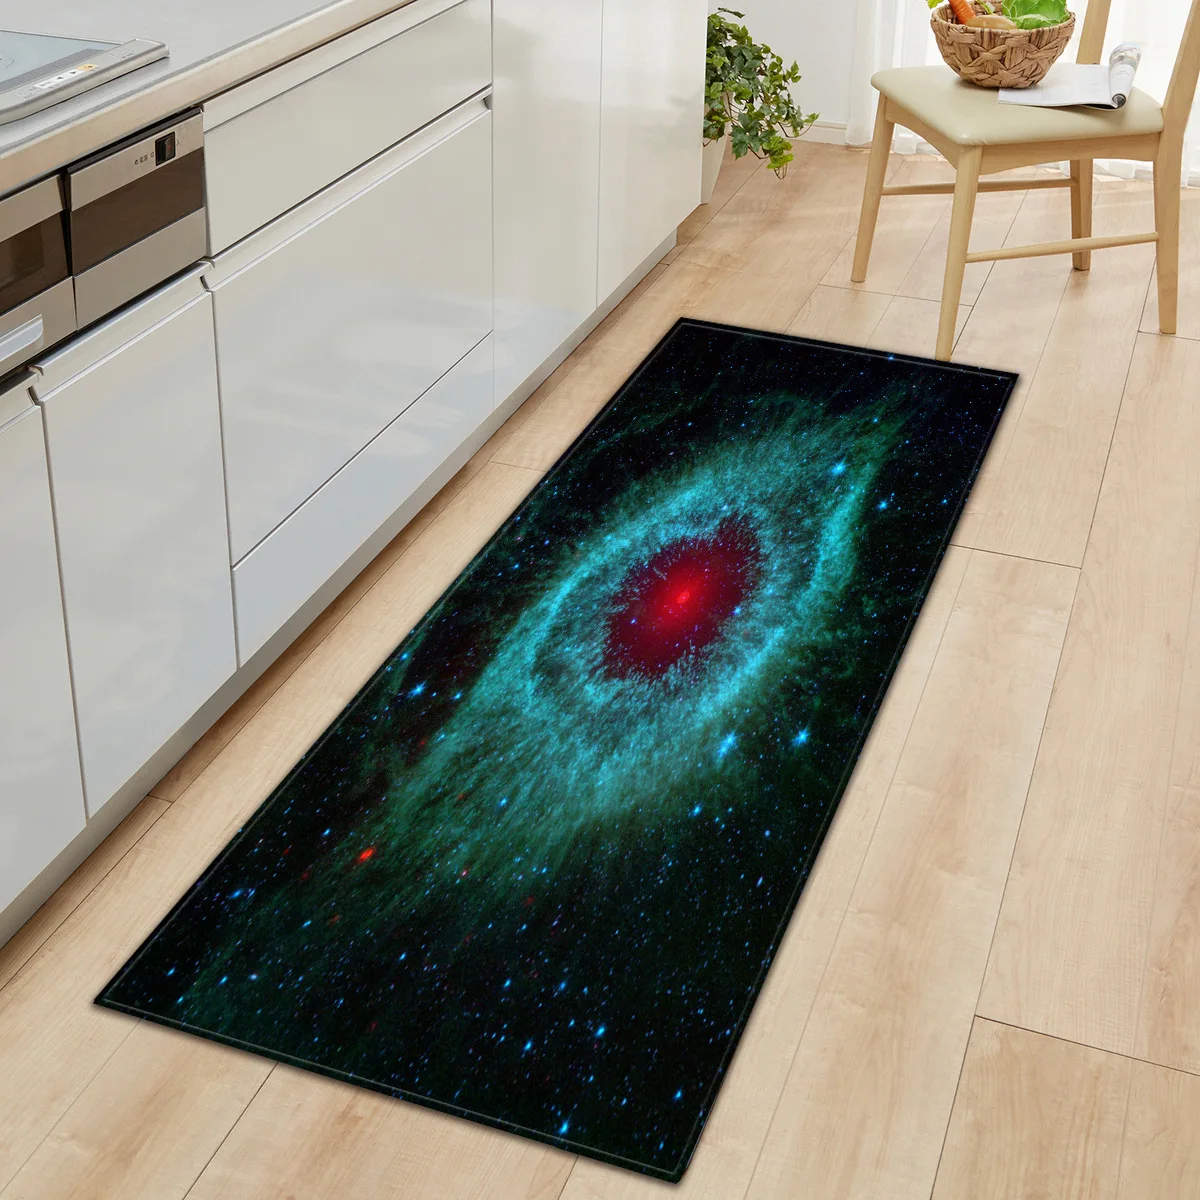 Universe Starry Sea Galaxy Cloud Pattern Printed Rectangular Felt Rug Bedroom Rug All Kitchen and Home Decorations Floor Mats